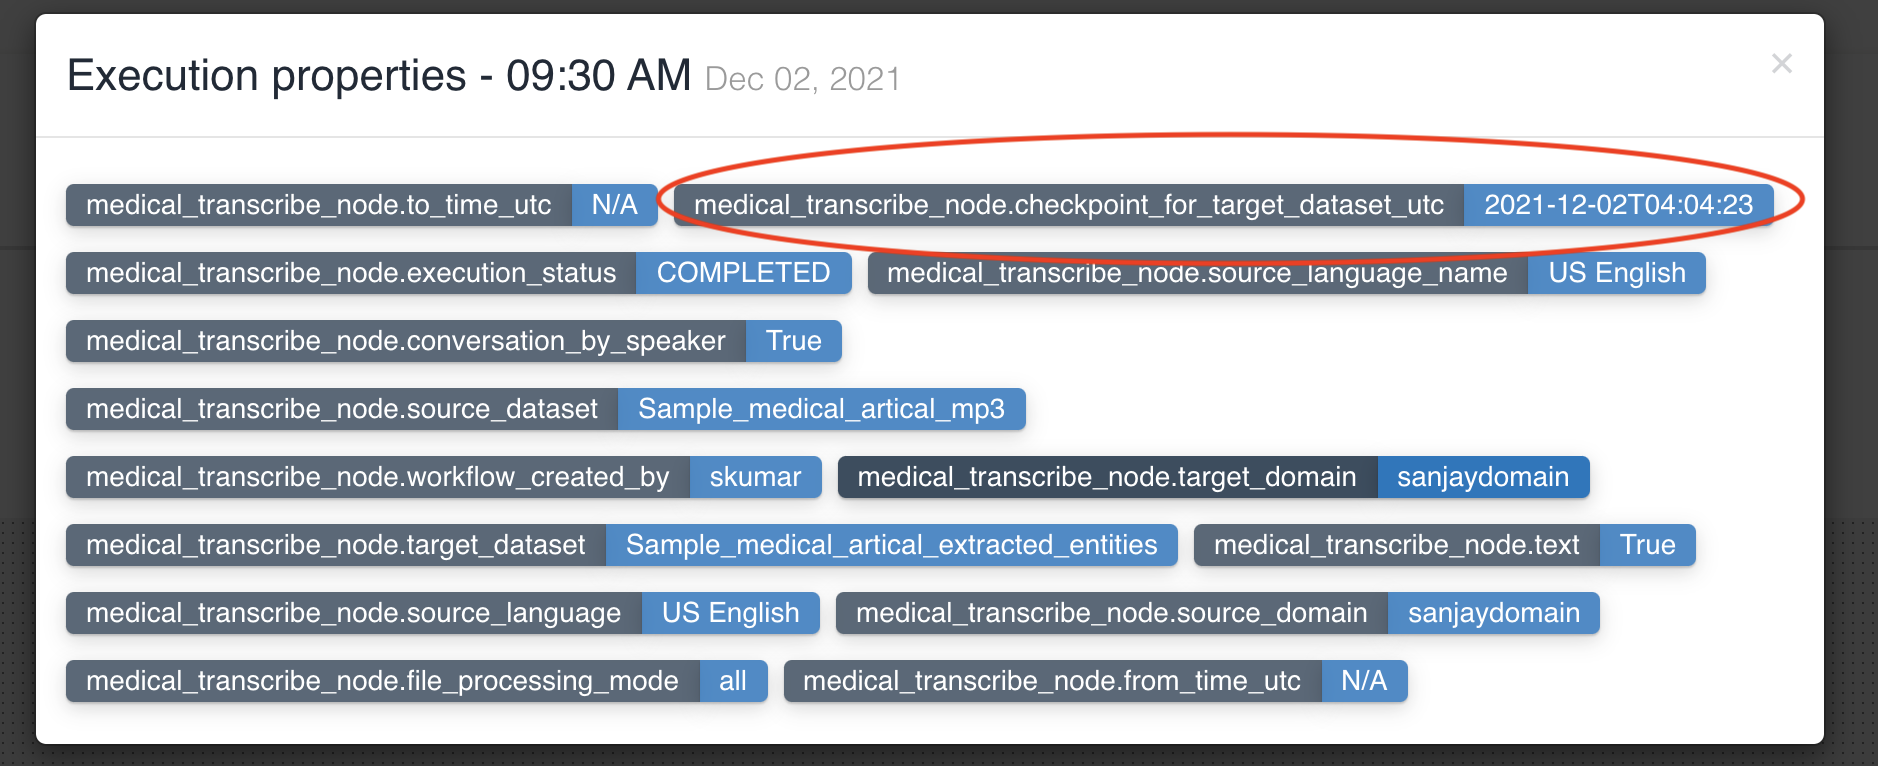 Workflow execution properties updated by medical transcribe node